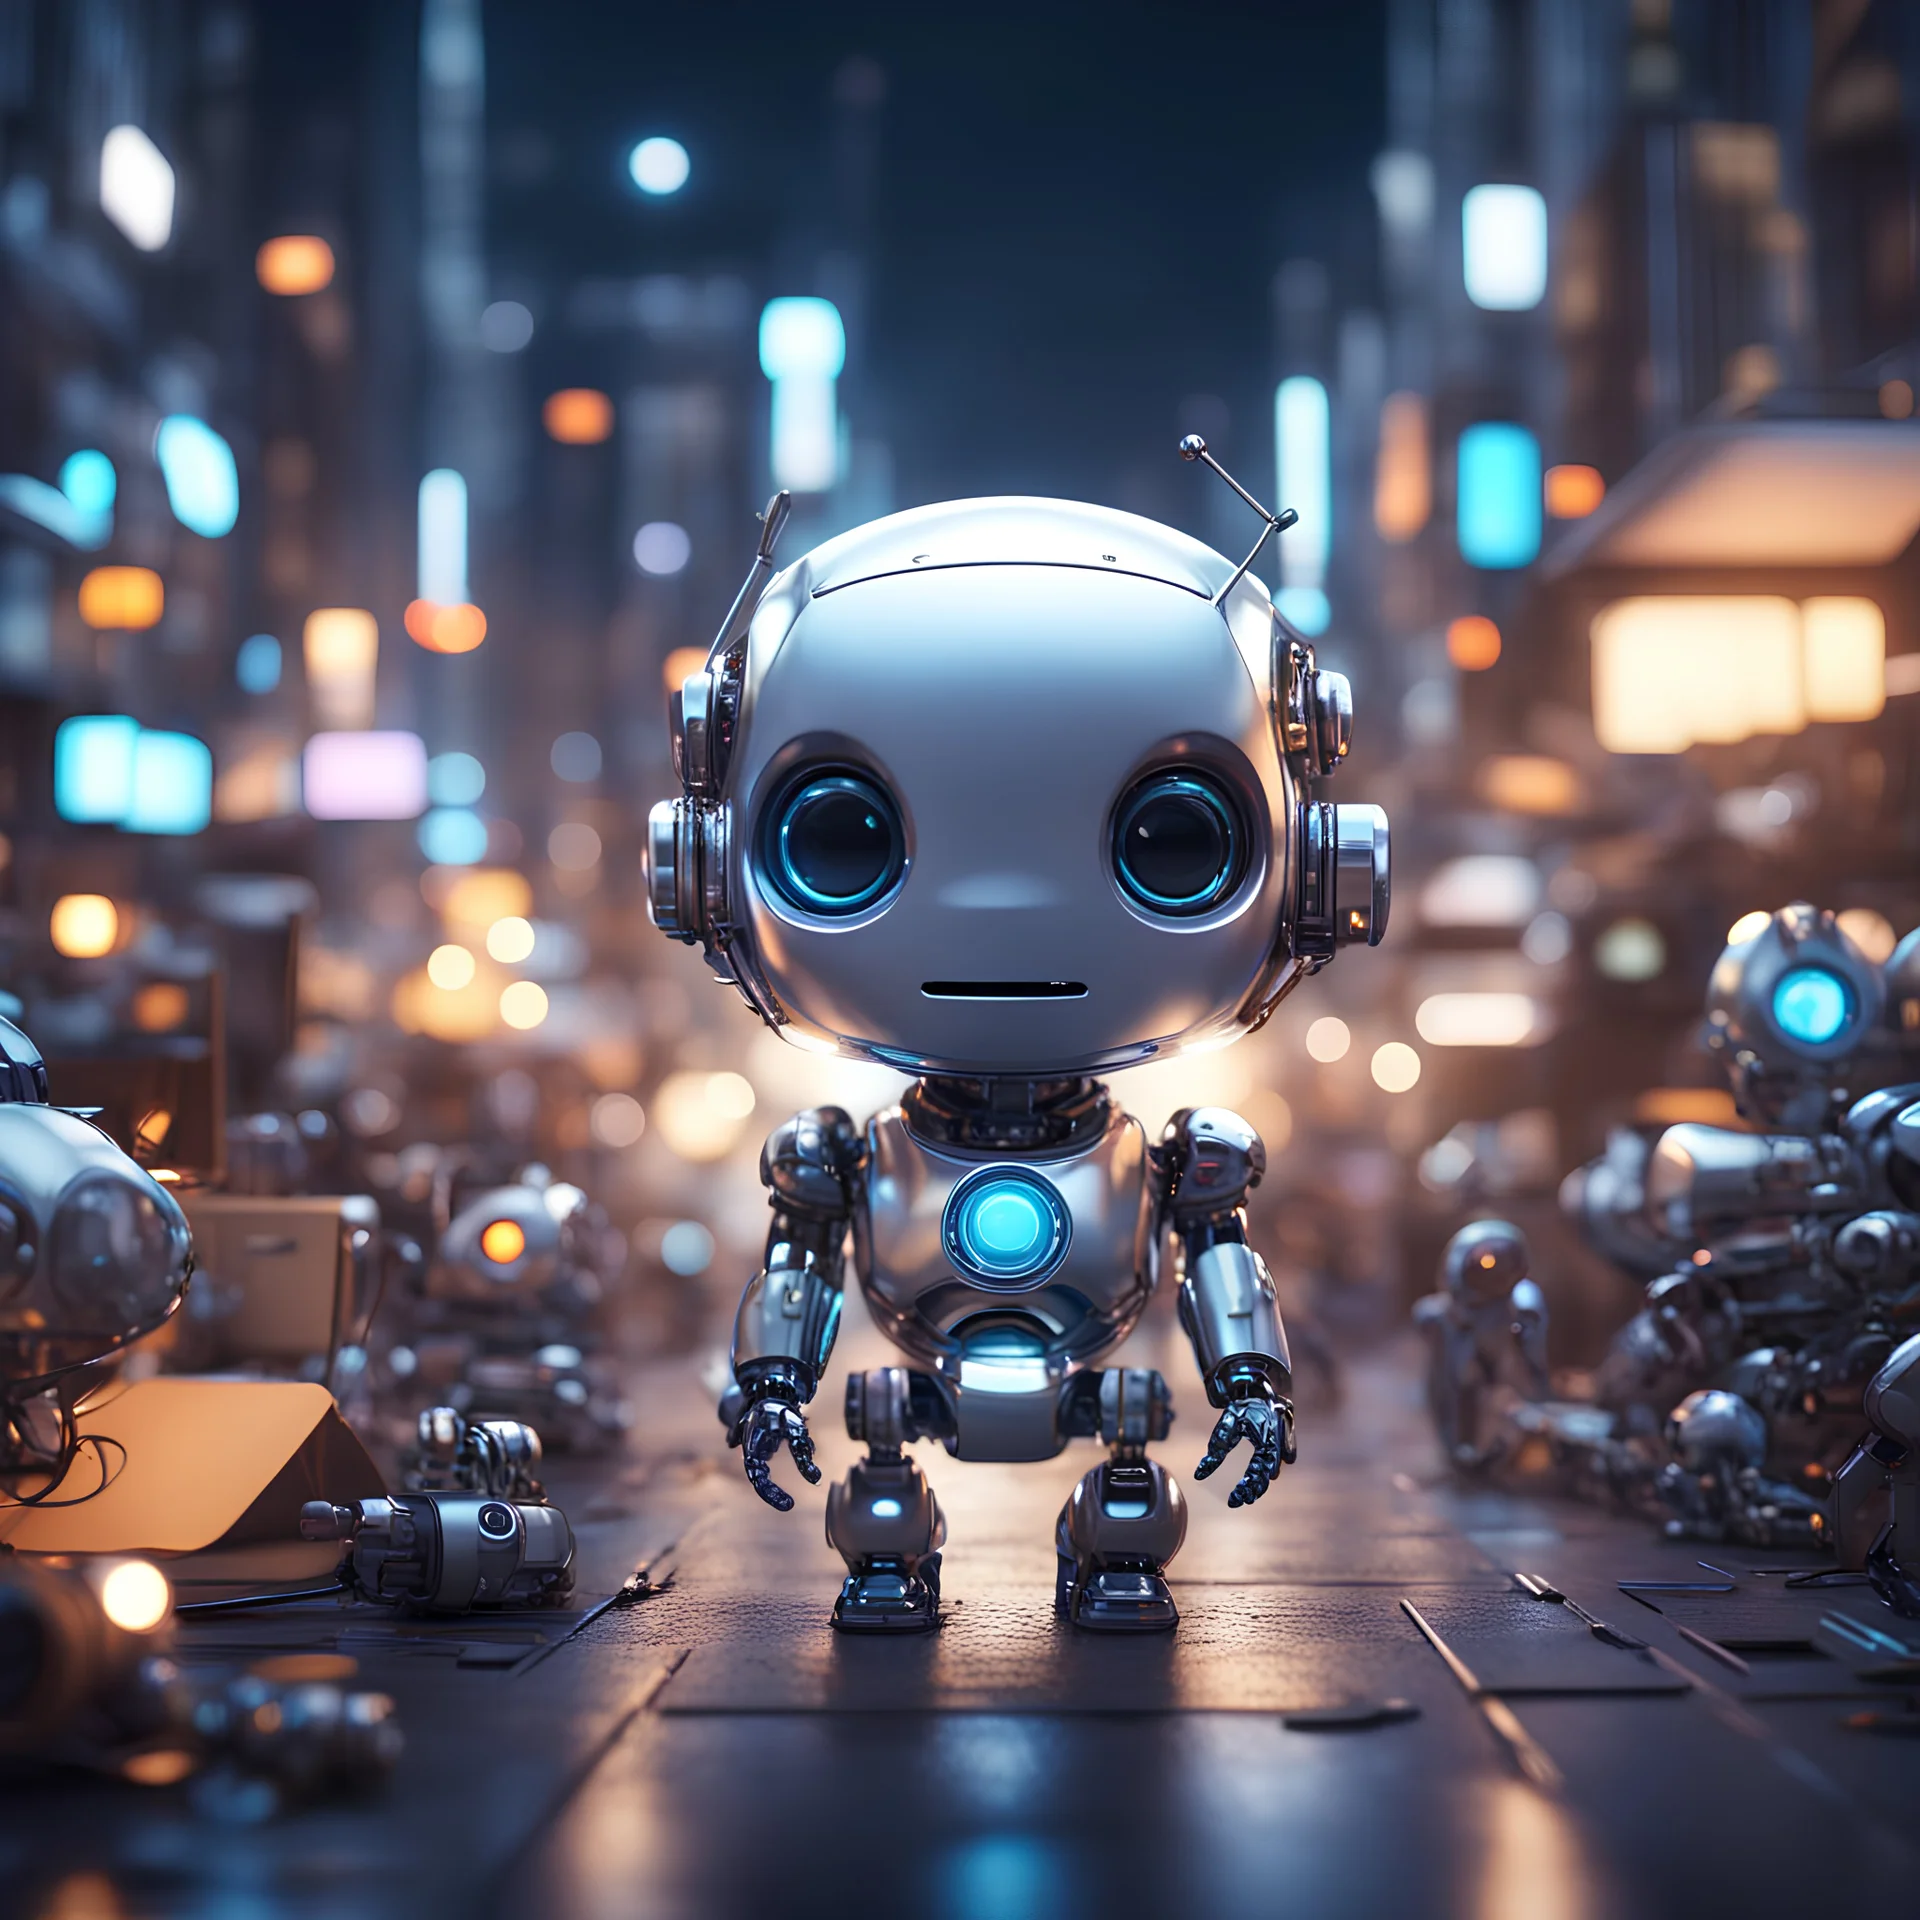 unreal engine render of a cute tiny robô in a busy, micro parts chromed, crowded city at night, cute eyes, volumetric lighting